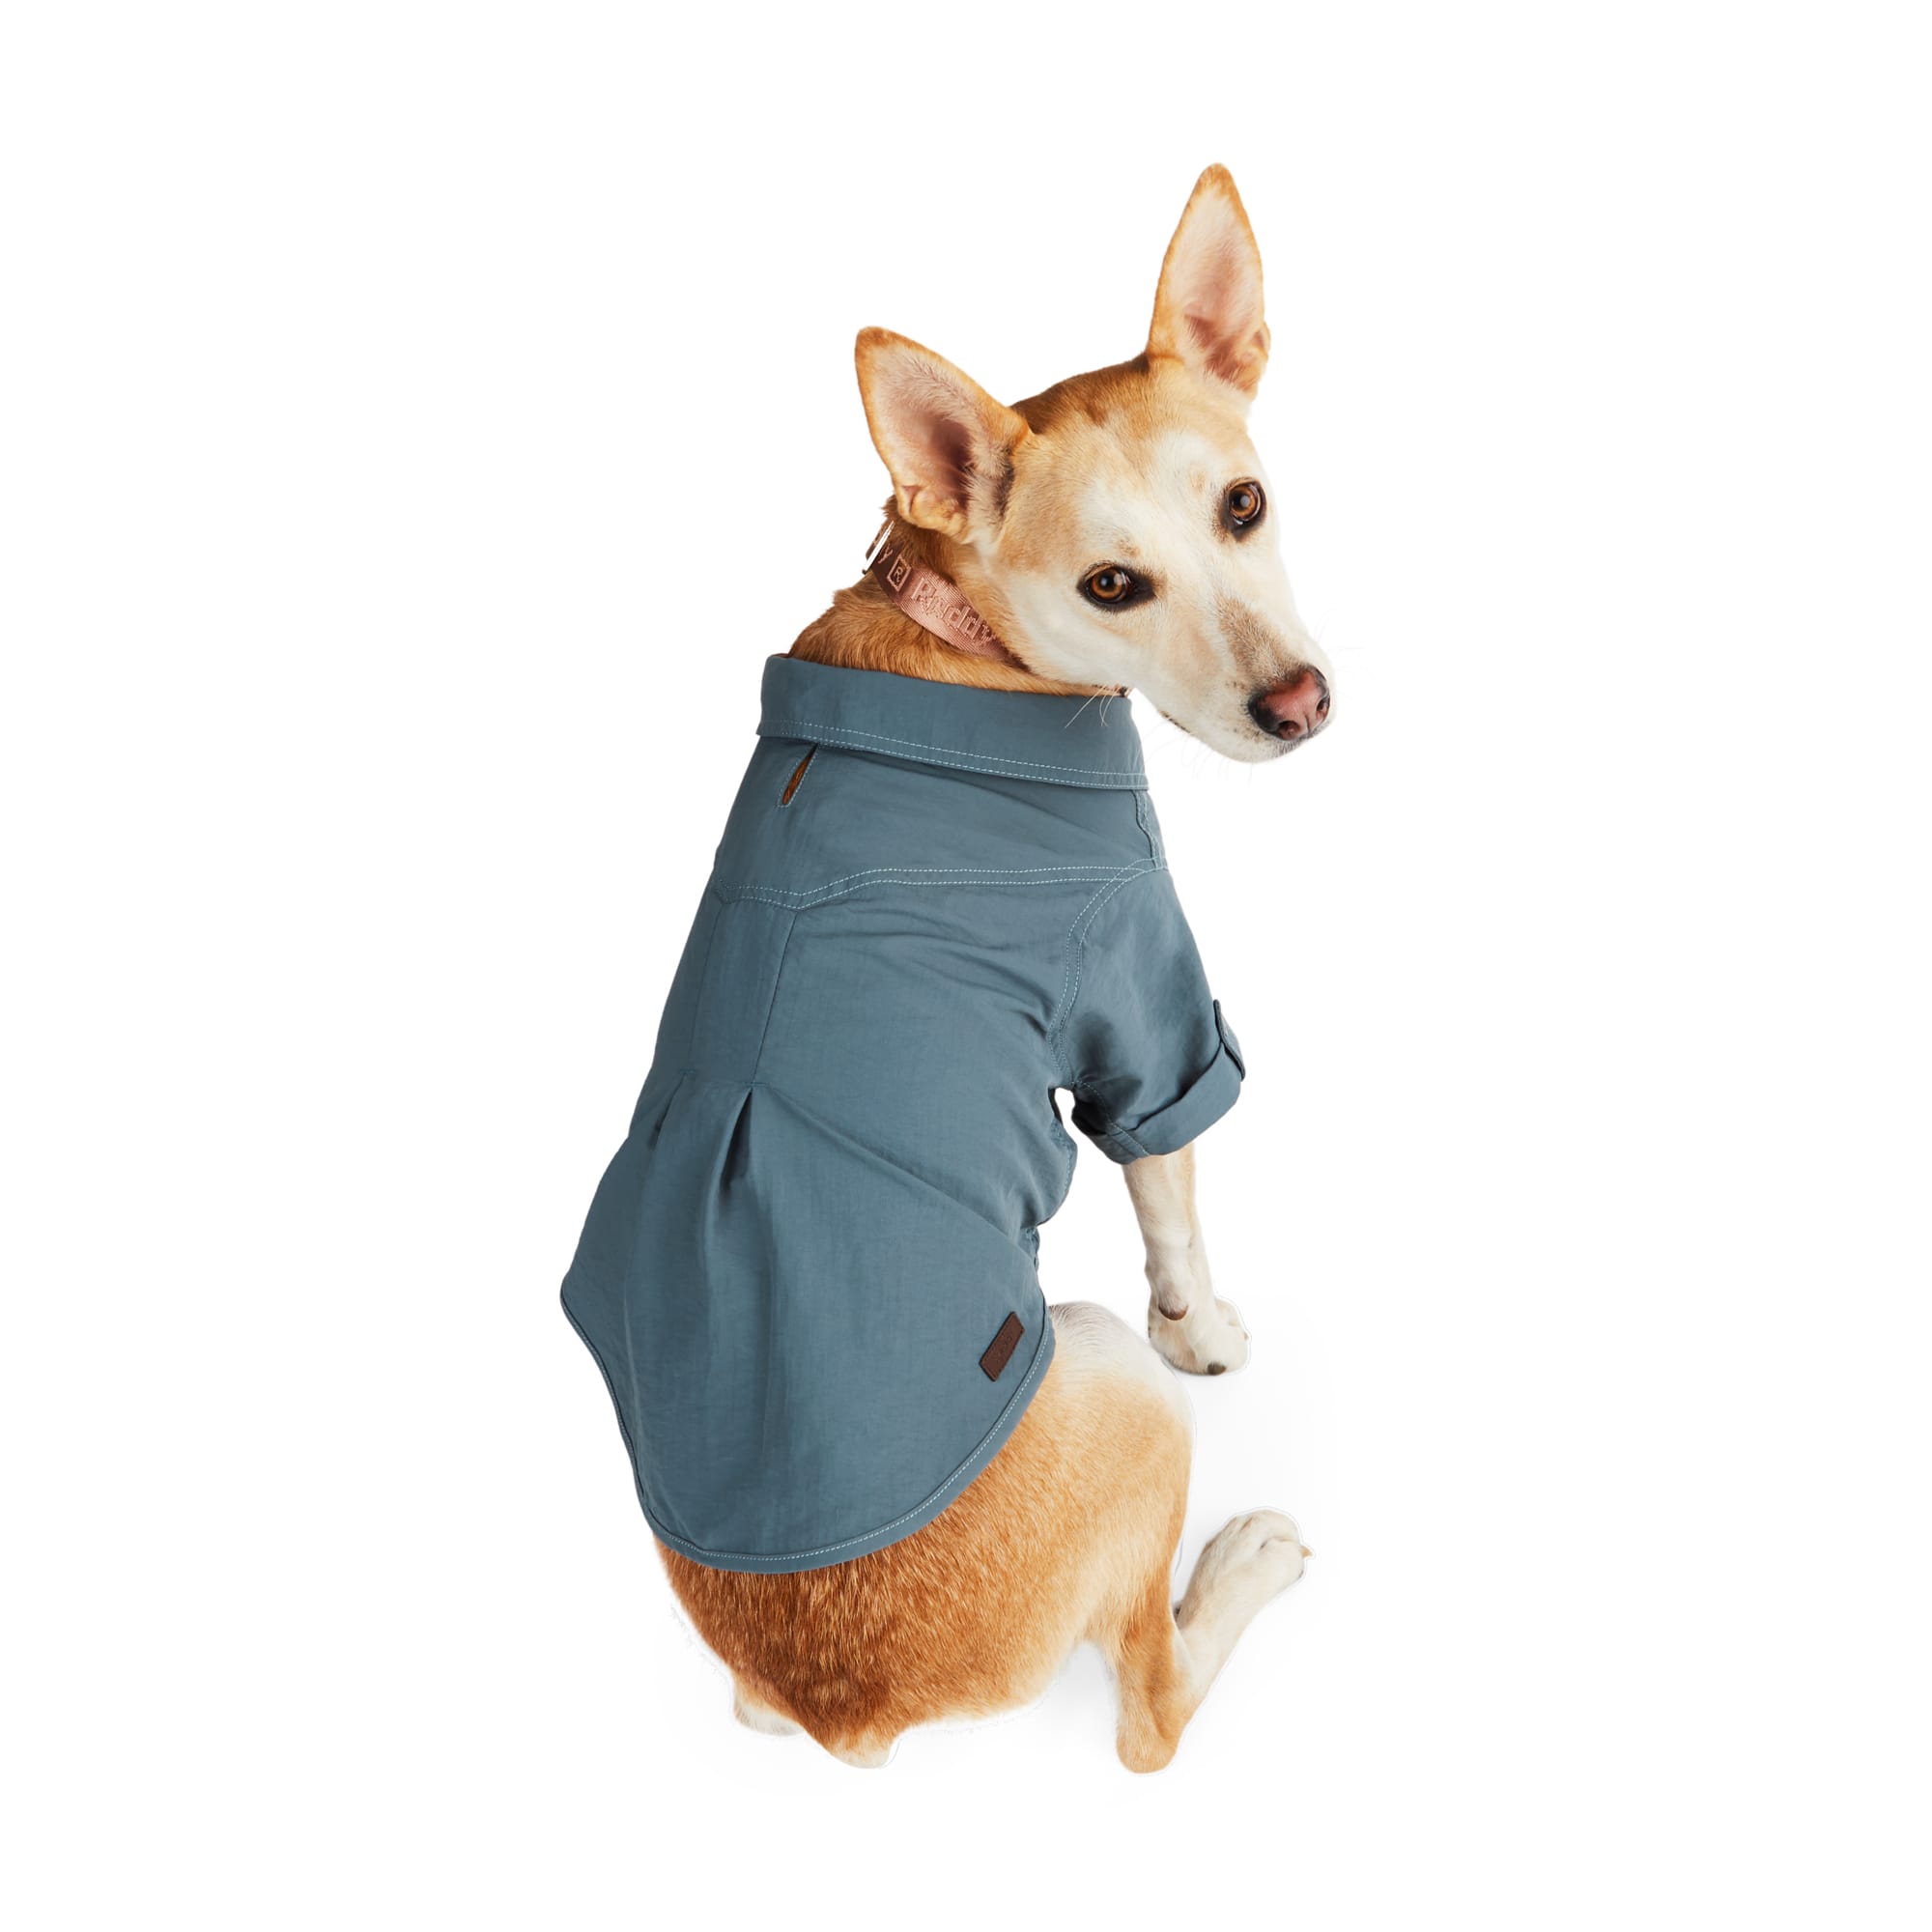 Reddy Crinkle Woven Dog Shirt, Blue, X-Small | Petco